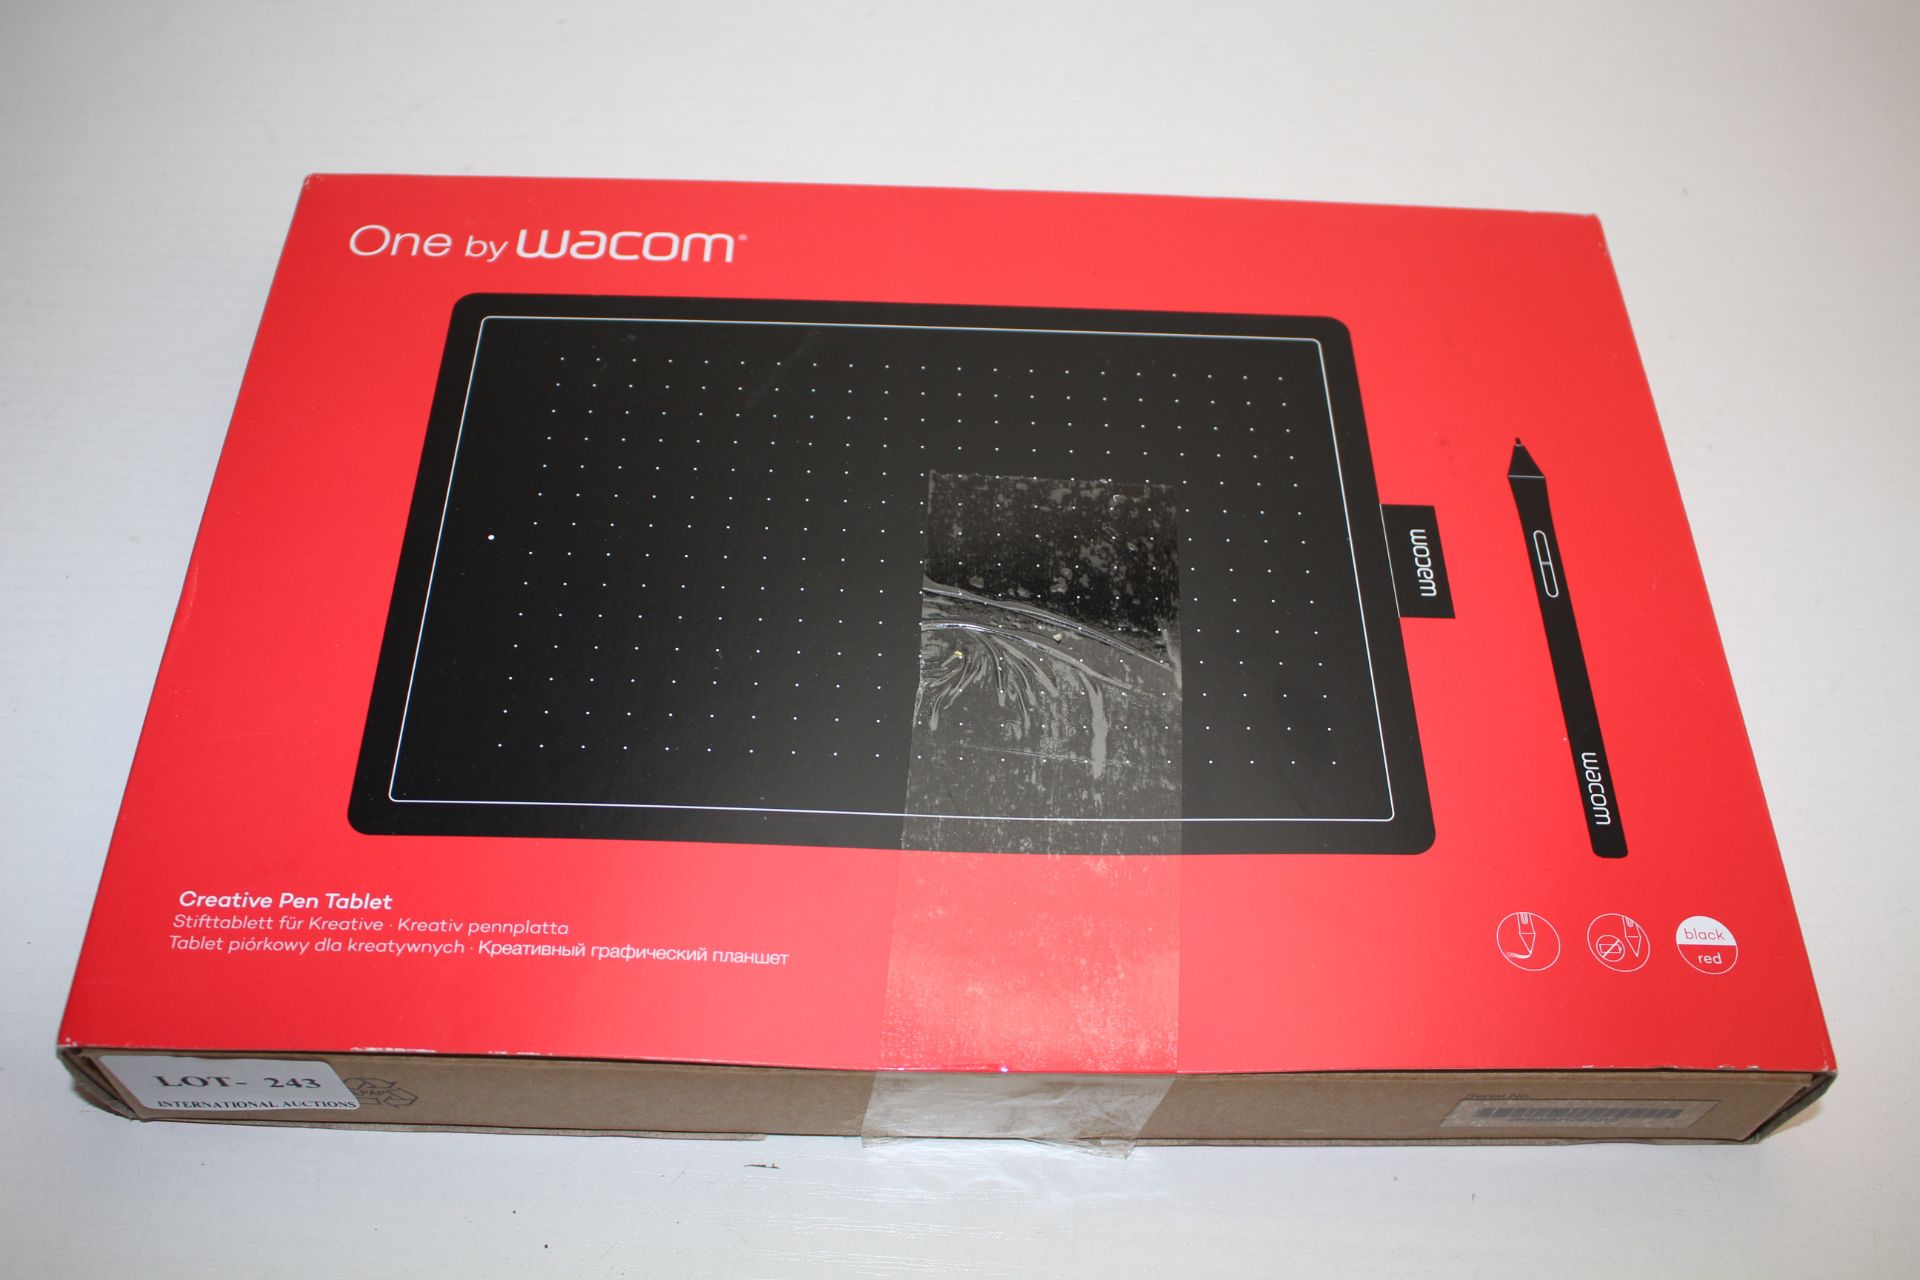 BOXED ONE BY WACOM CREATIVE PEN TABLET KSO-B420 RRP £35.99Condition ReportAppraisal Available on